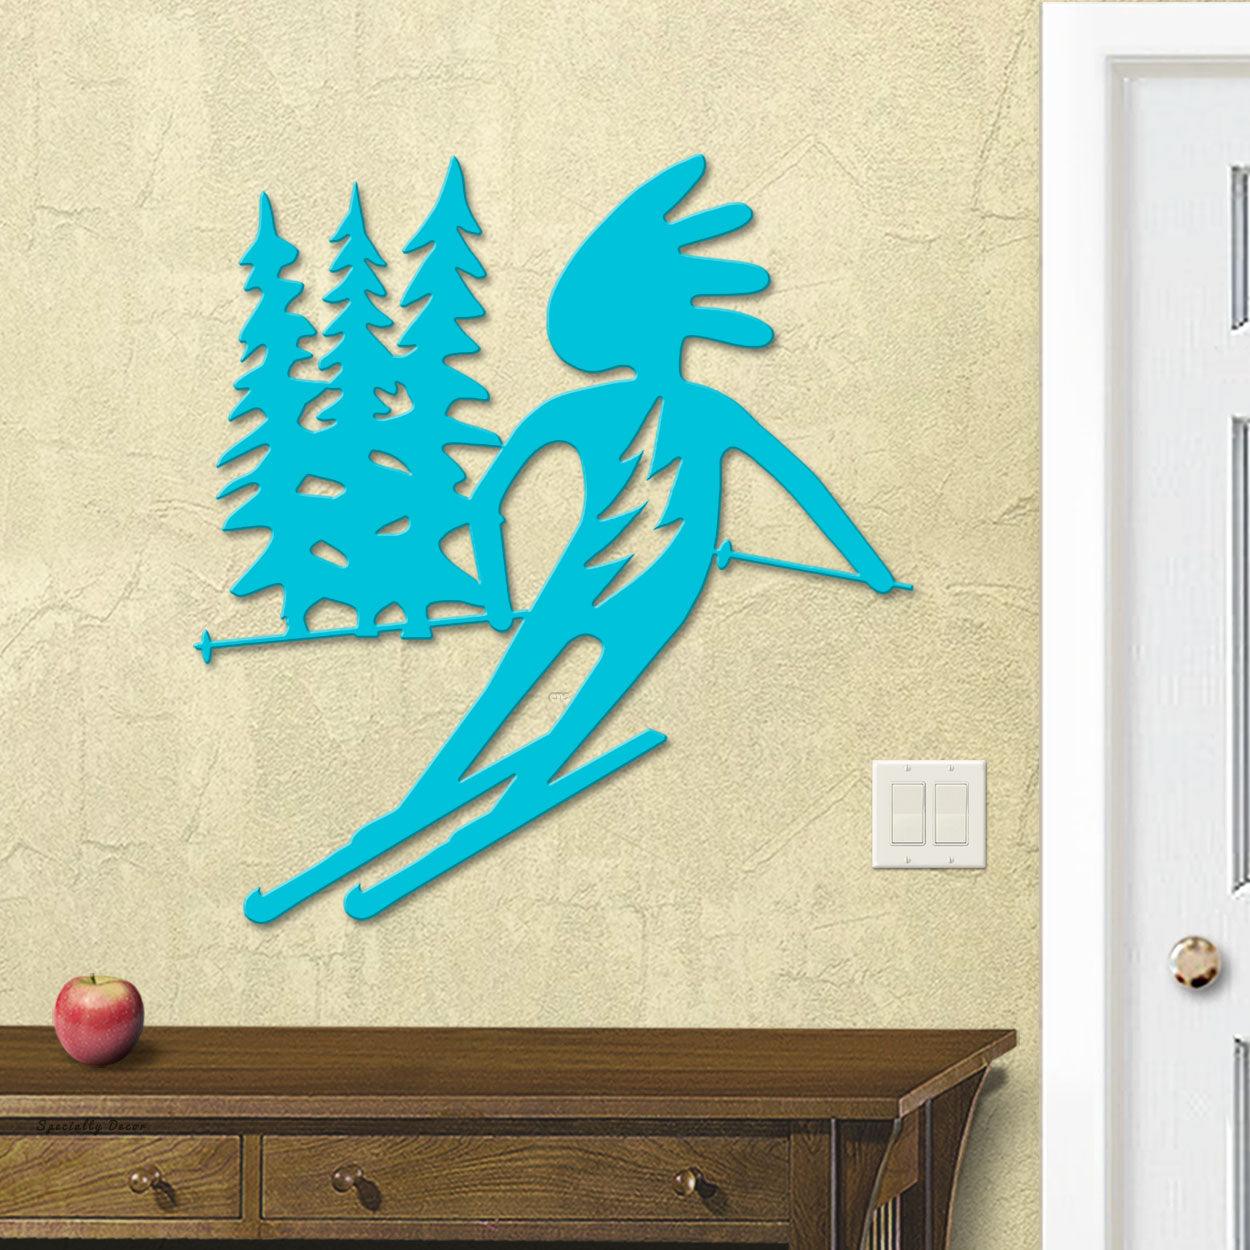 625026XL Pure Colors Collection 30in H x 28in W Metal Wall Art - Kokopelli Skier